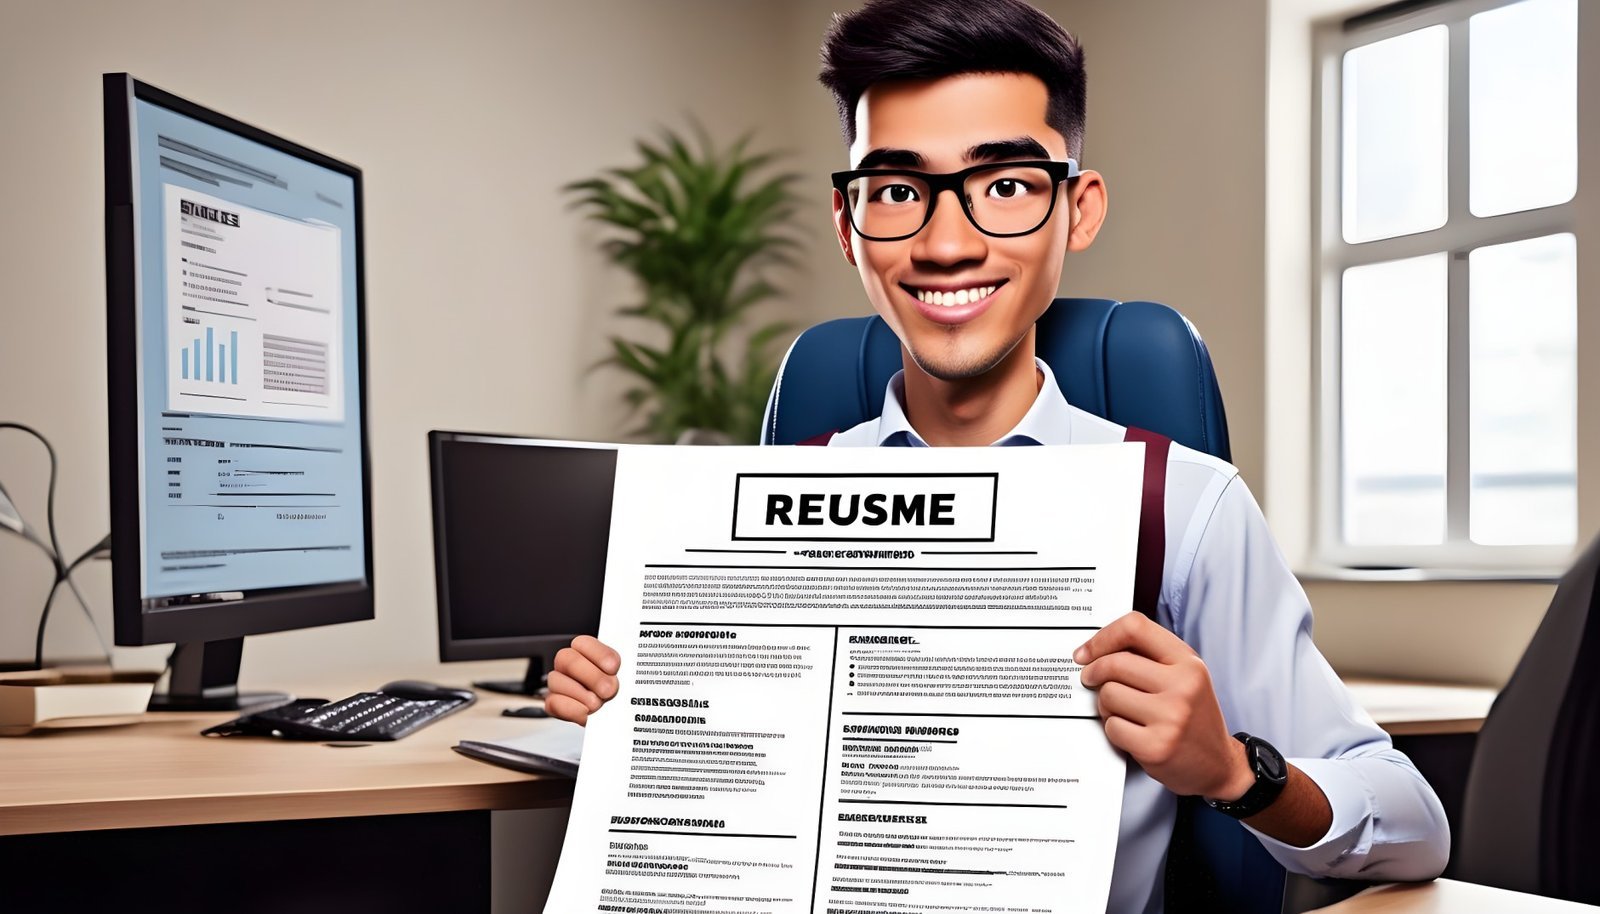 Use ChatGPT to write a resume